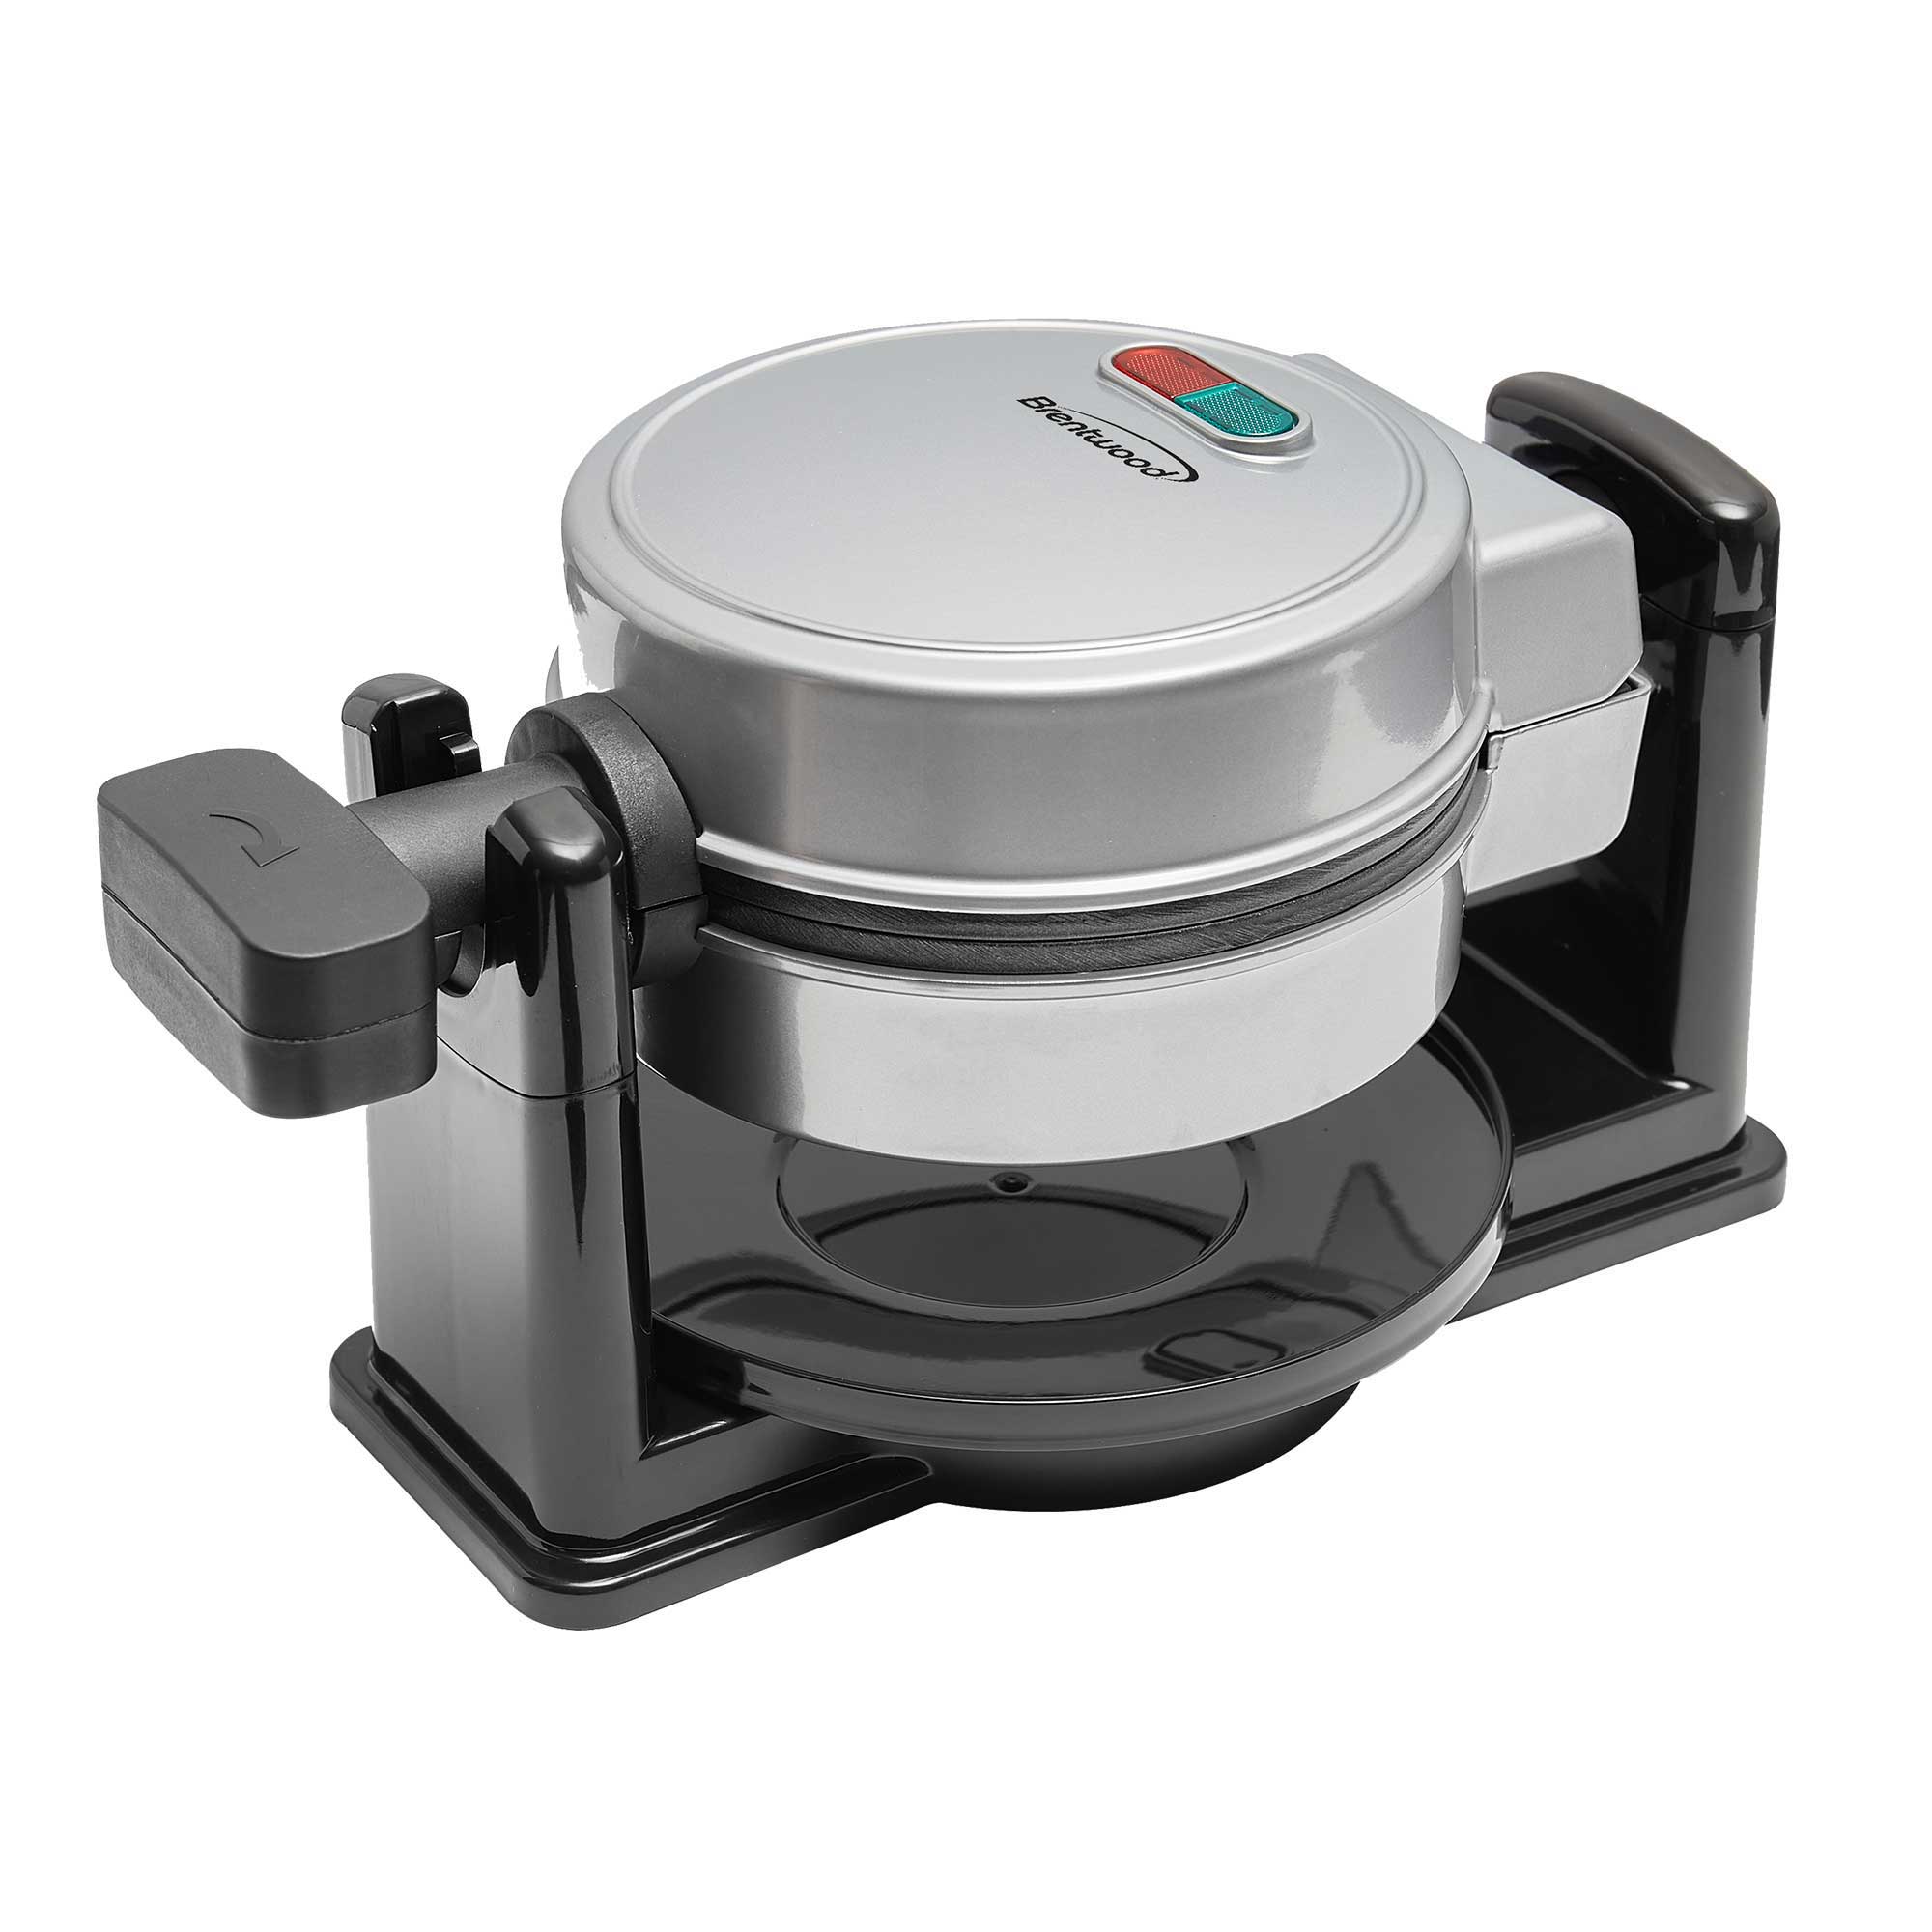 Brentwood TS-231S 5-Inch Non-Stick Flip Belgian Waffle Maker with Temperature Control, Silver